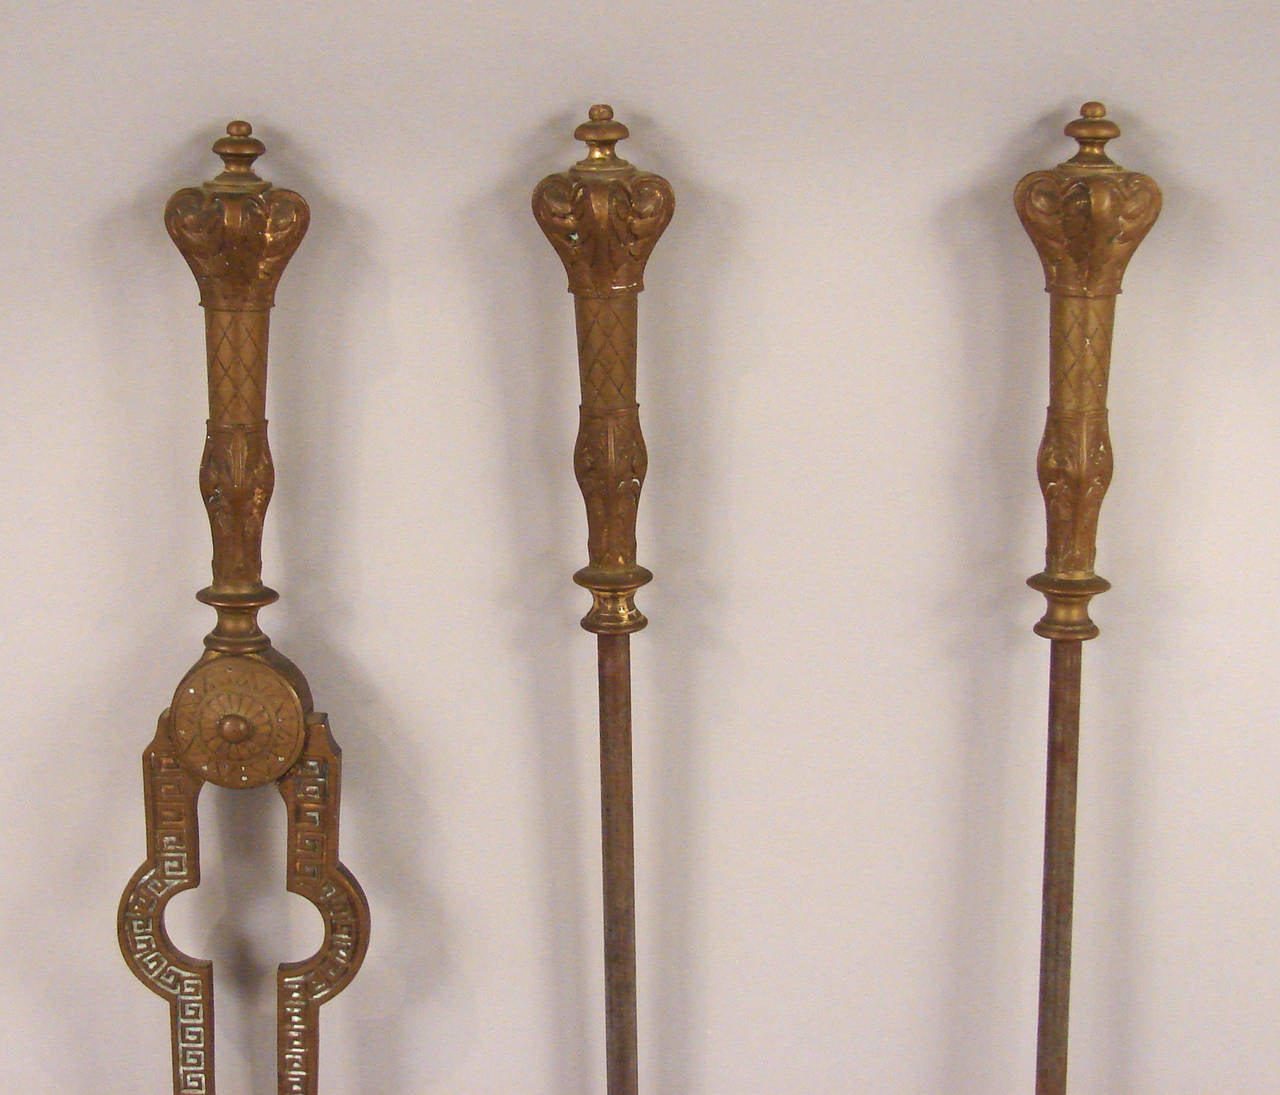 A set of English Victorian brass and steel fire tools consisting of a shovel, poker and tongs, circa 1880.